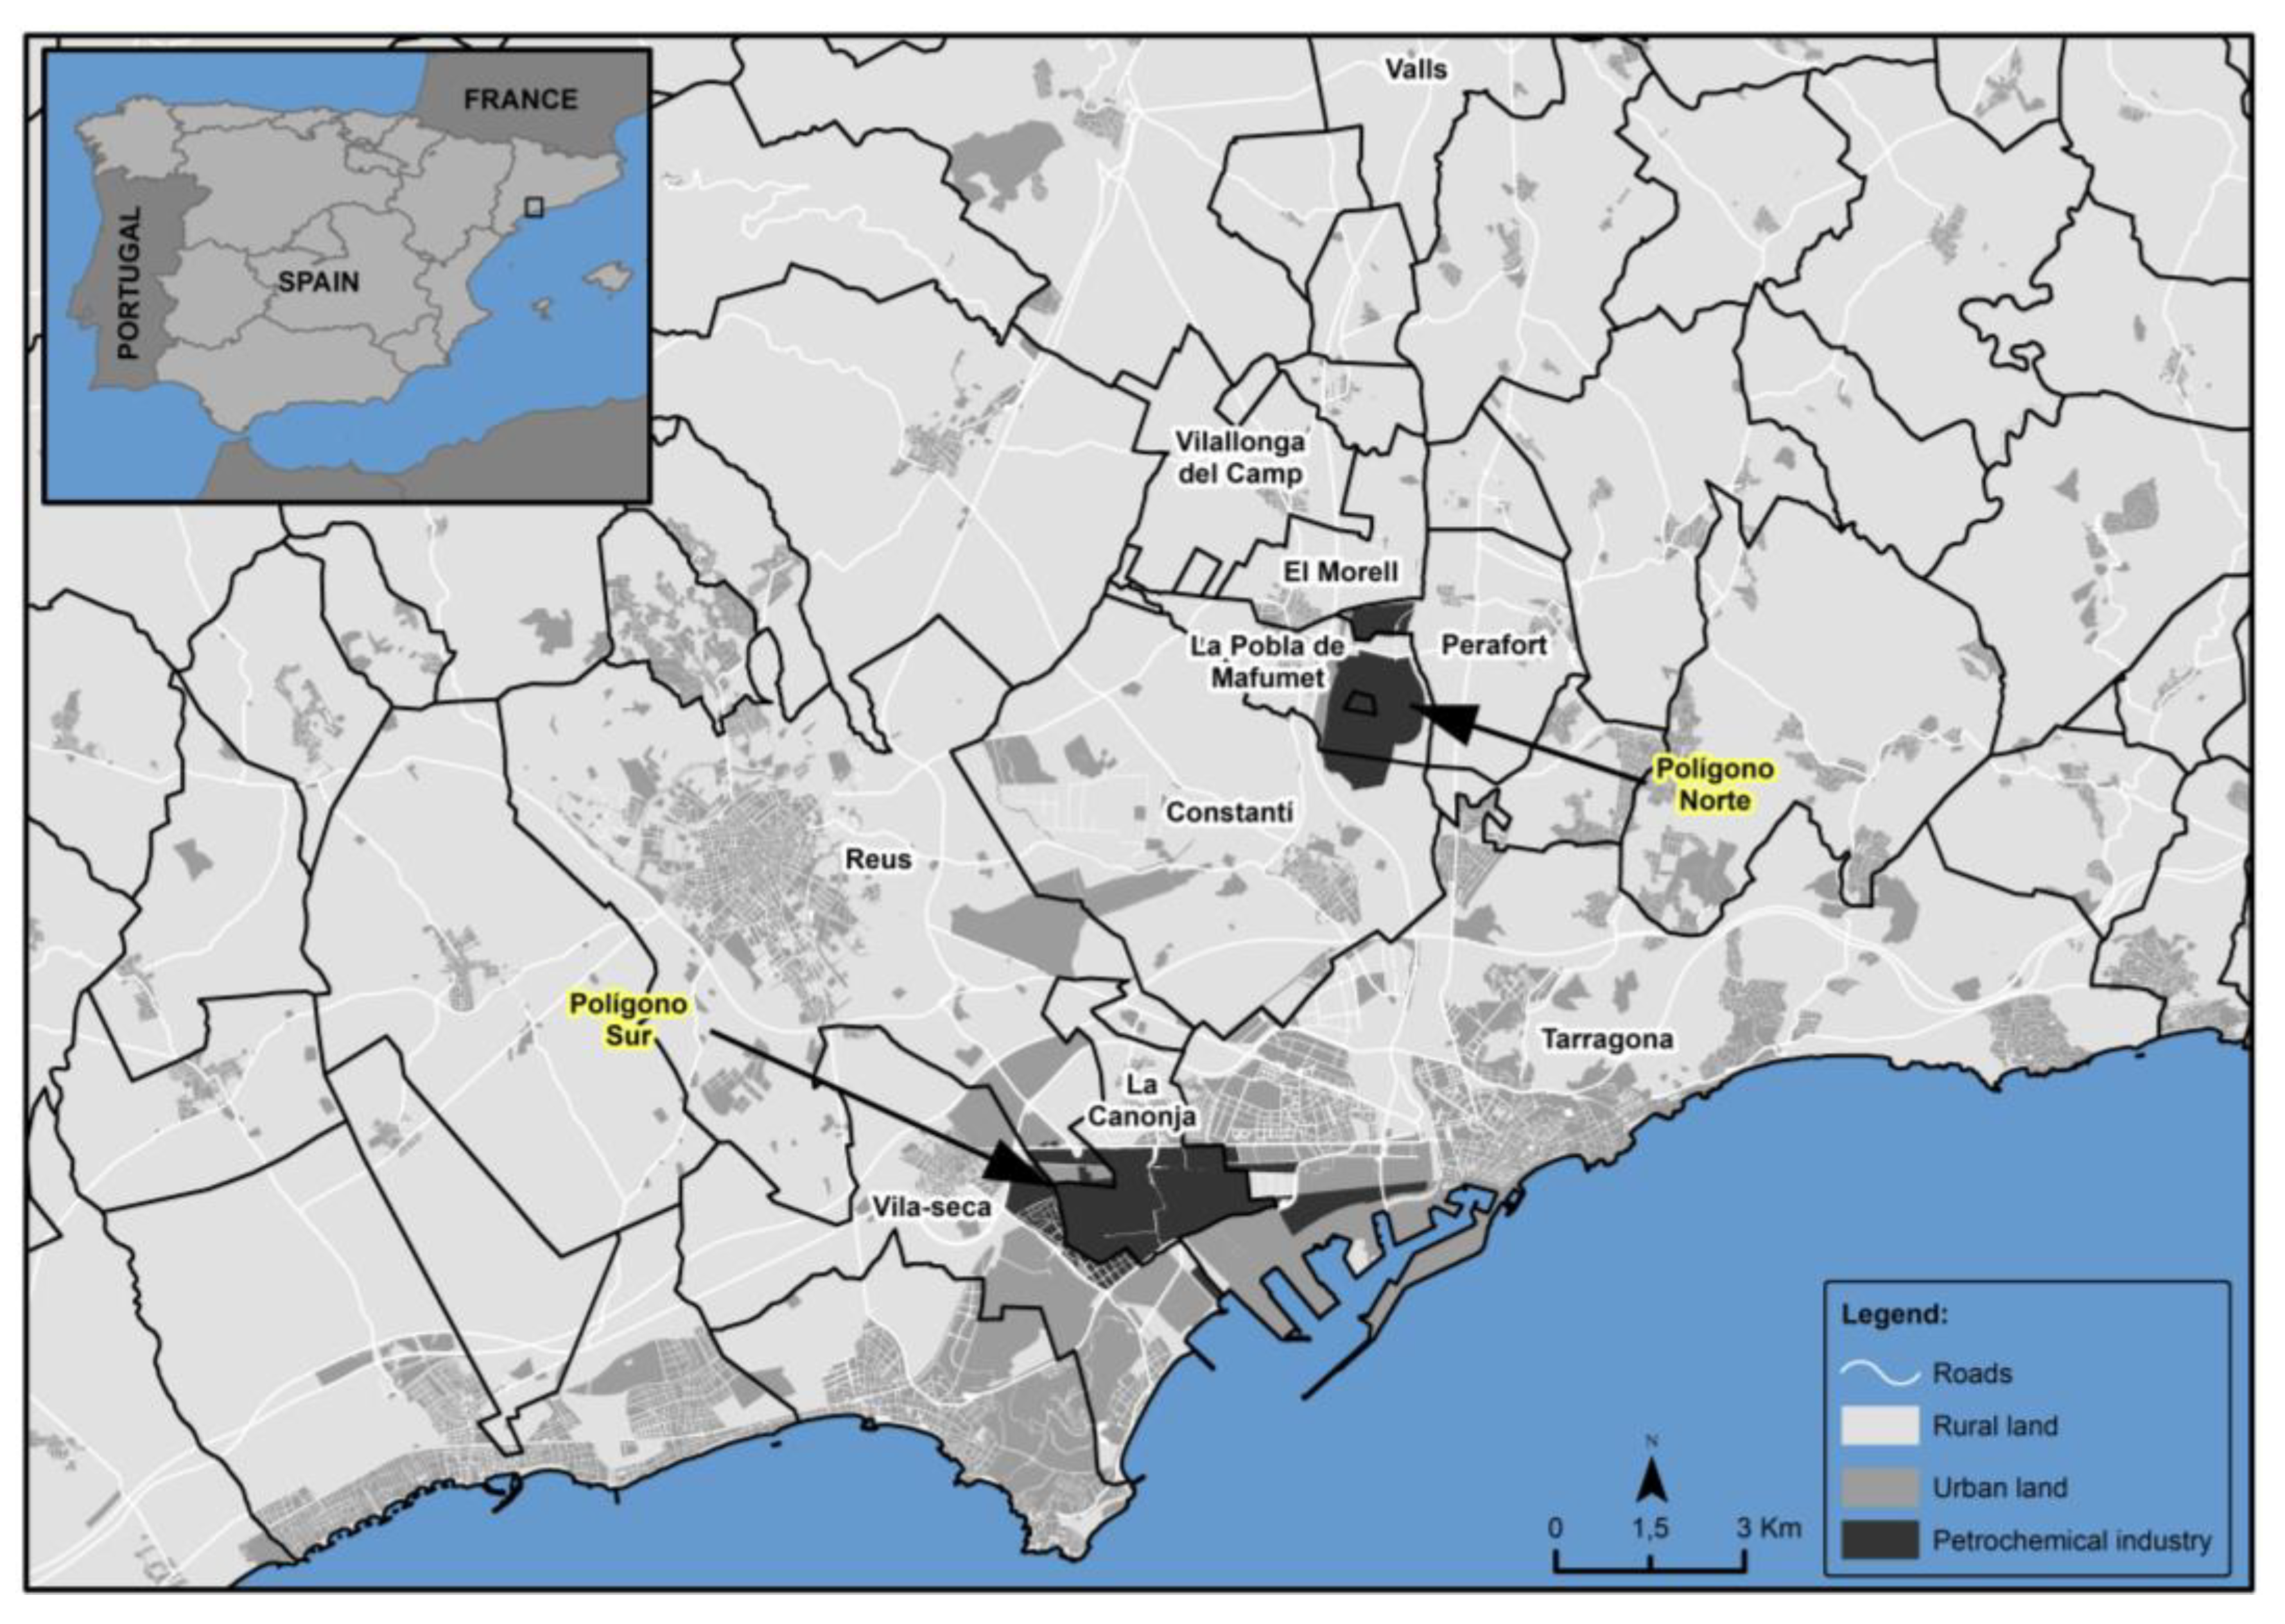 Environments | Free Full-Text | Public Risk Perception of the Petrochemical  Industry, Measured Using a Public Participation Geographic Information  System: A Case Study of Camp de Tarragona (Spain)